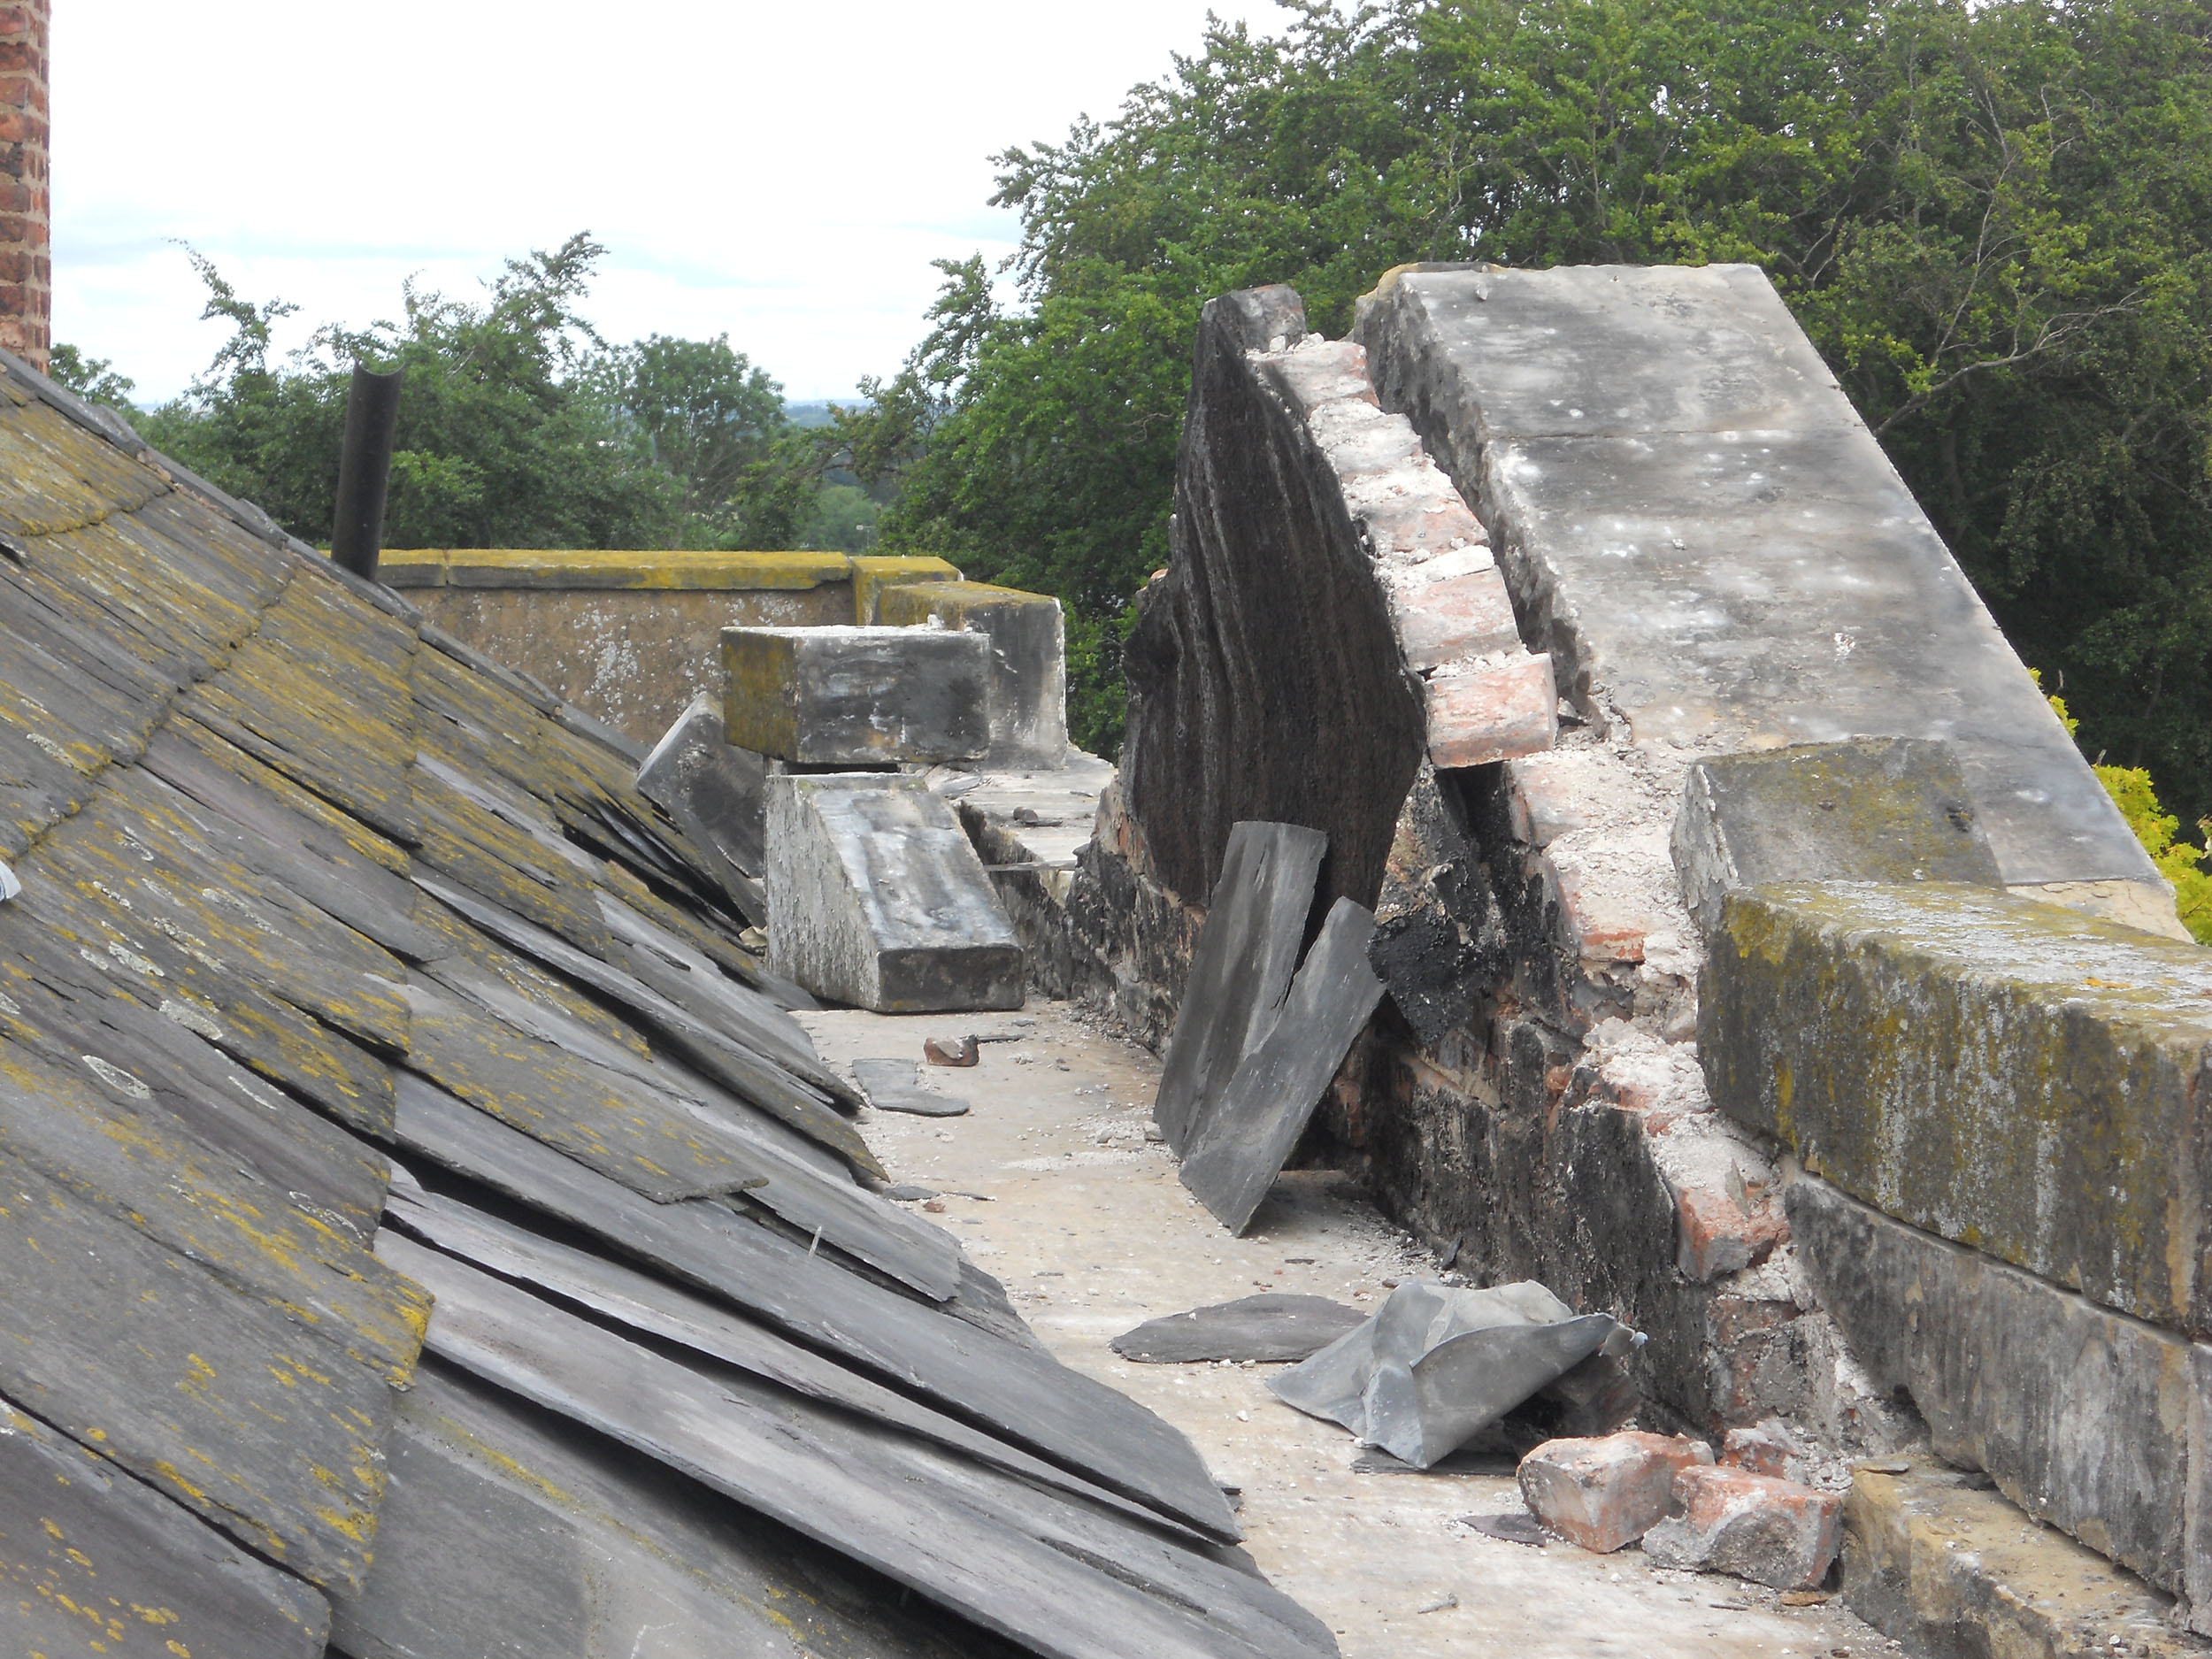 Damaged tiles, brickwork and gutter up on the roof of Tarvin Hall, Cheshire.